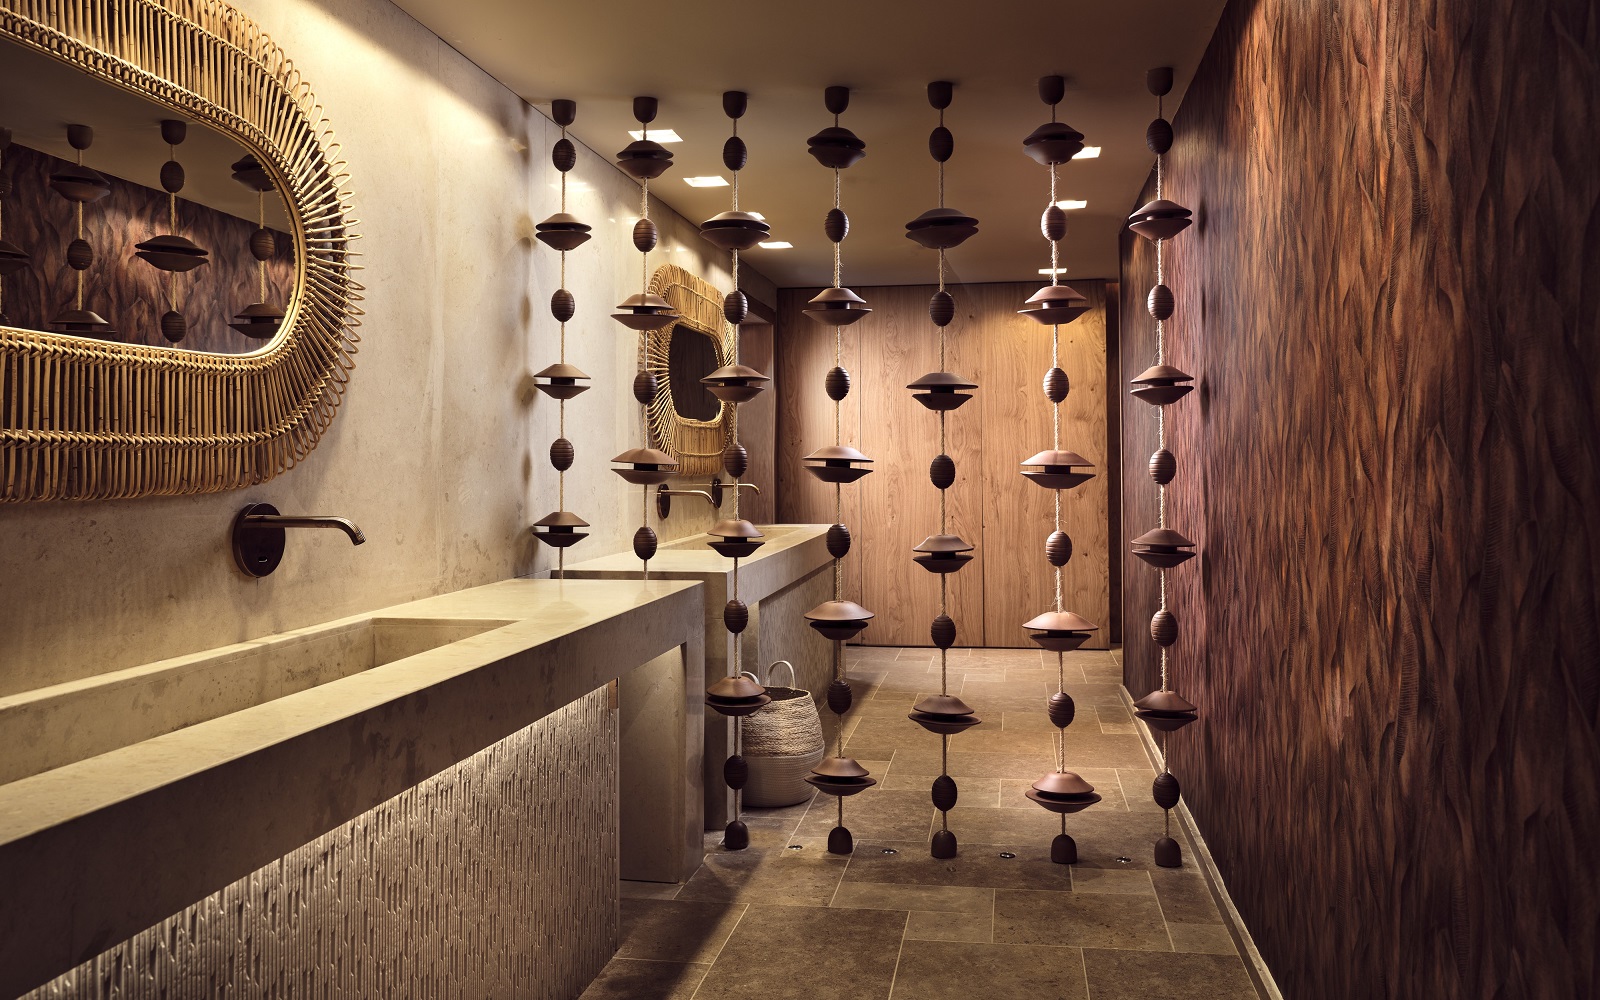 bathroom in stone and wood with sculptural wooden curtain beads by studio LOST Royal senses Crete